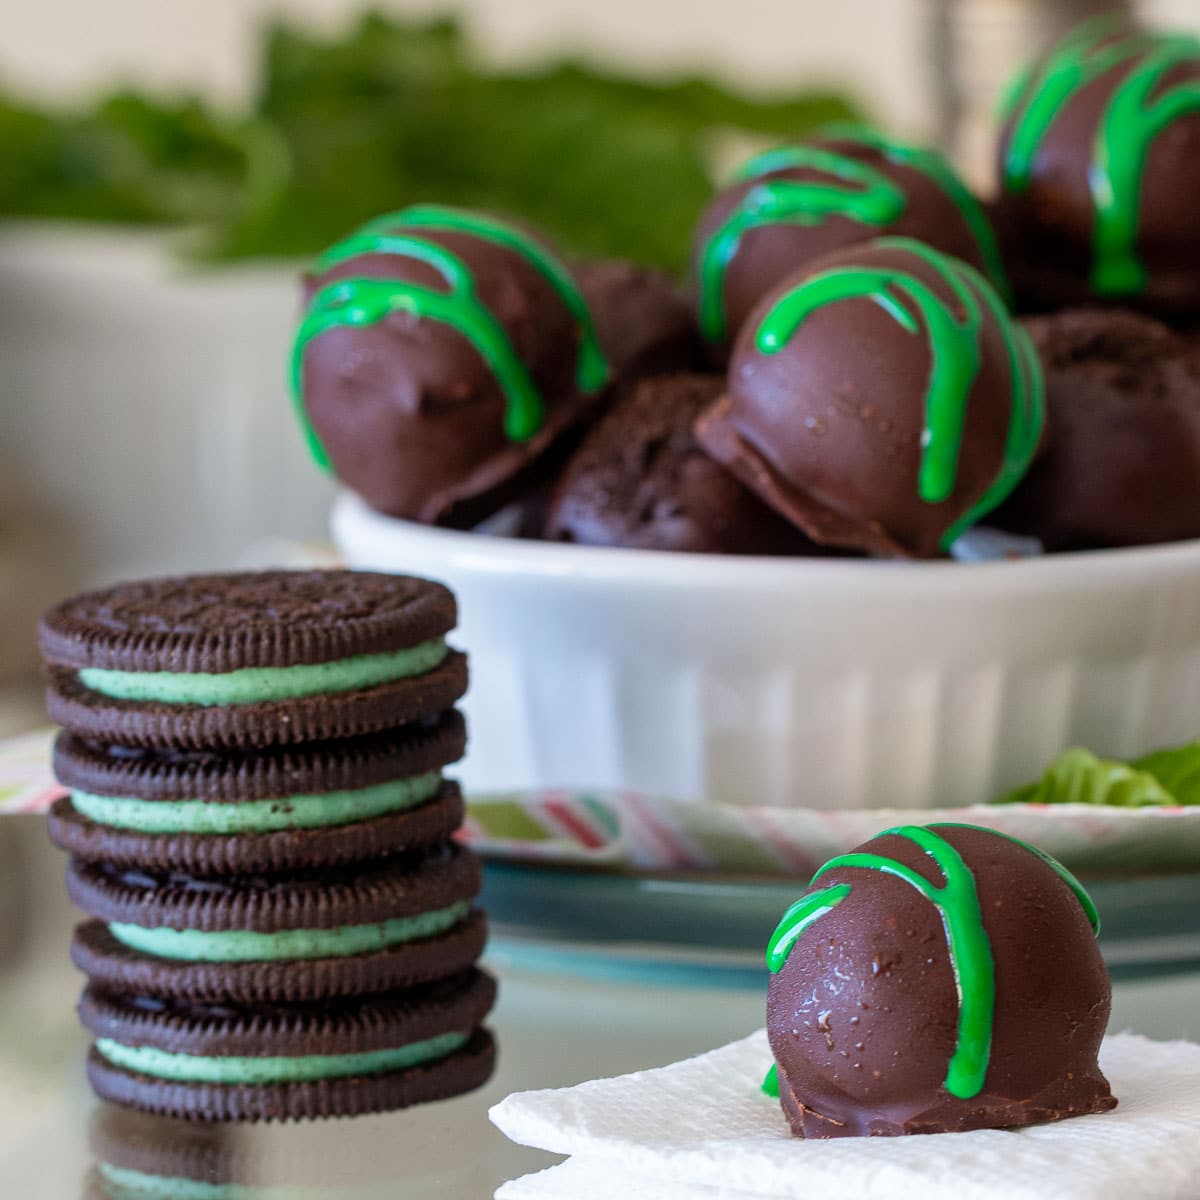 Mint Oreo balls made without cream cheese in a white bowl with a stack of Oreo biscuits.